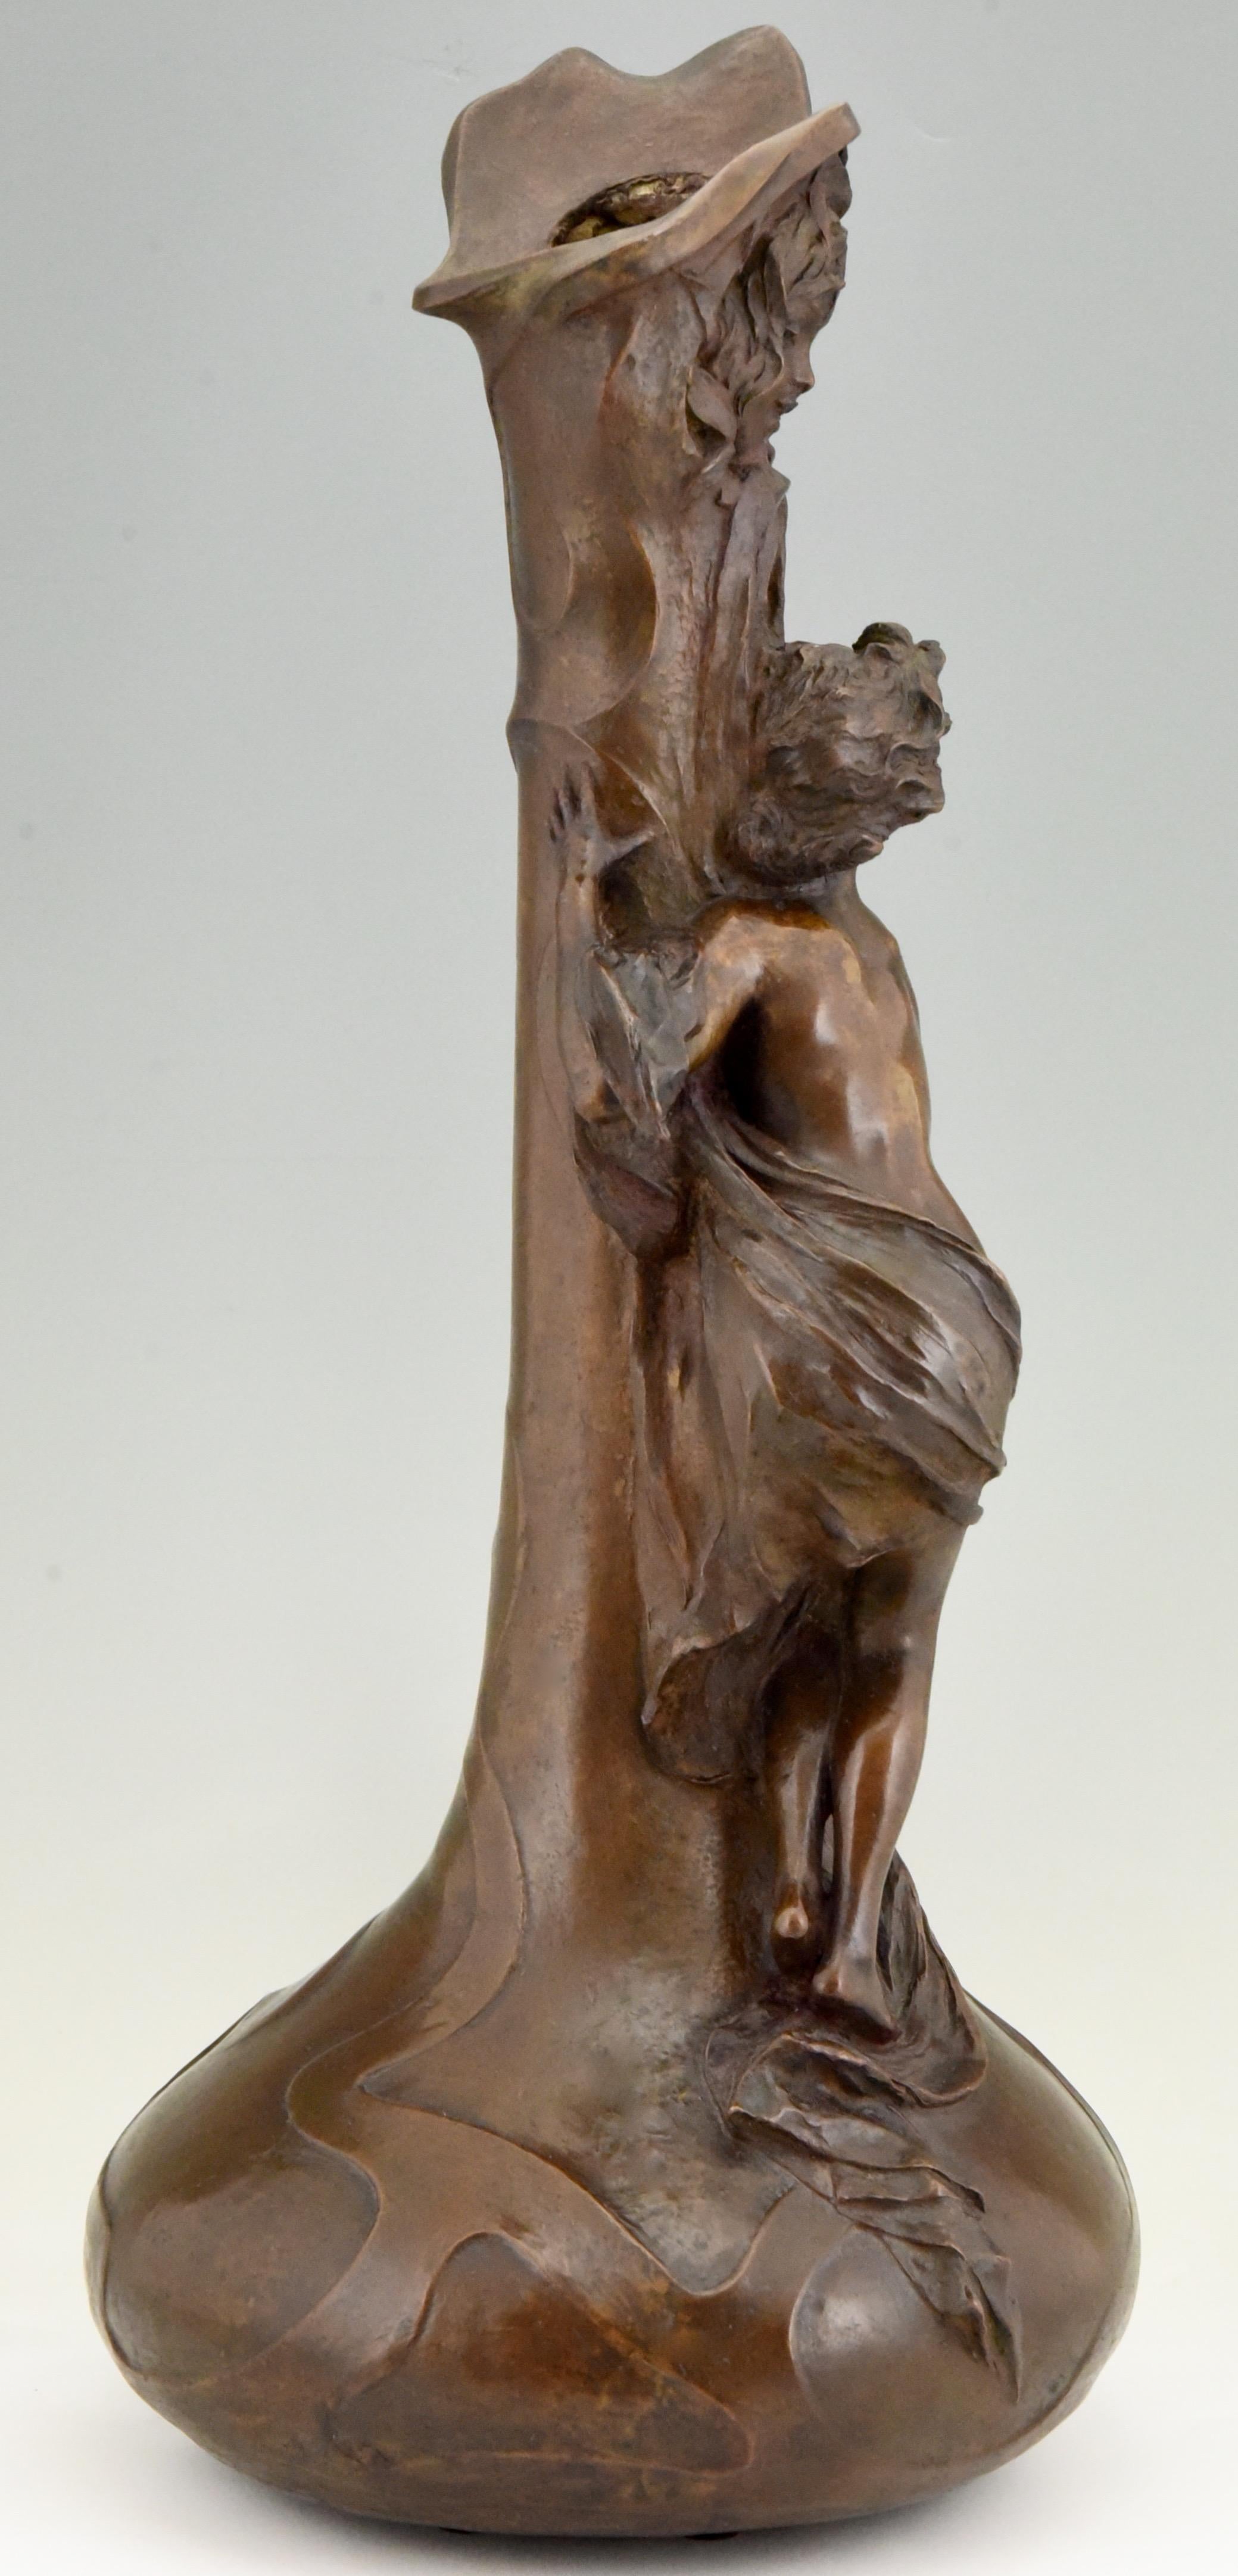 Patinated Tall Art Nouveau Bronze Vase Lady at a Fountain Lucas Madrassi, France, 1900